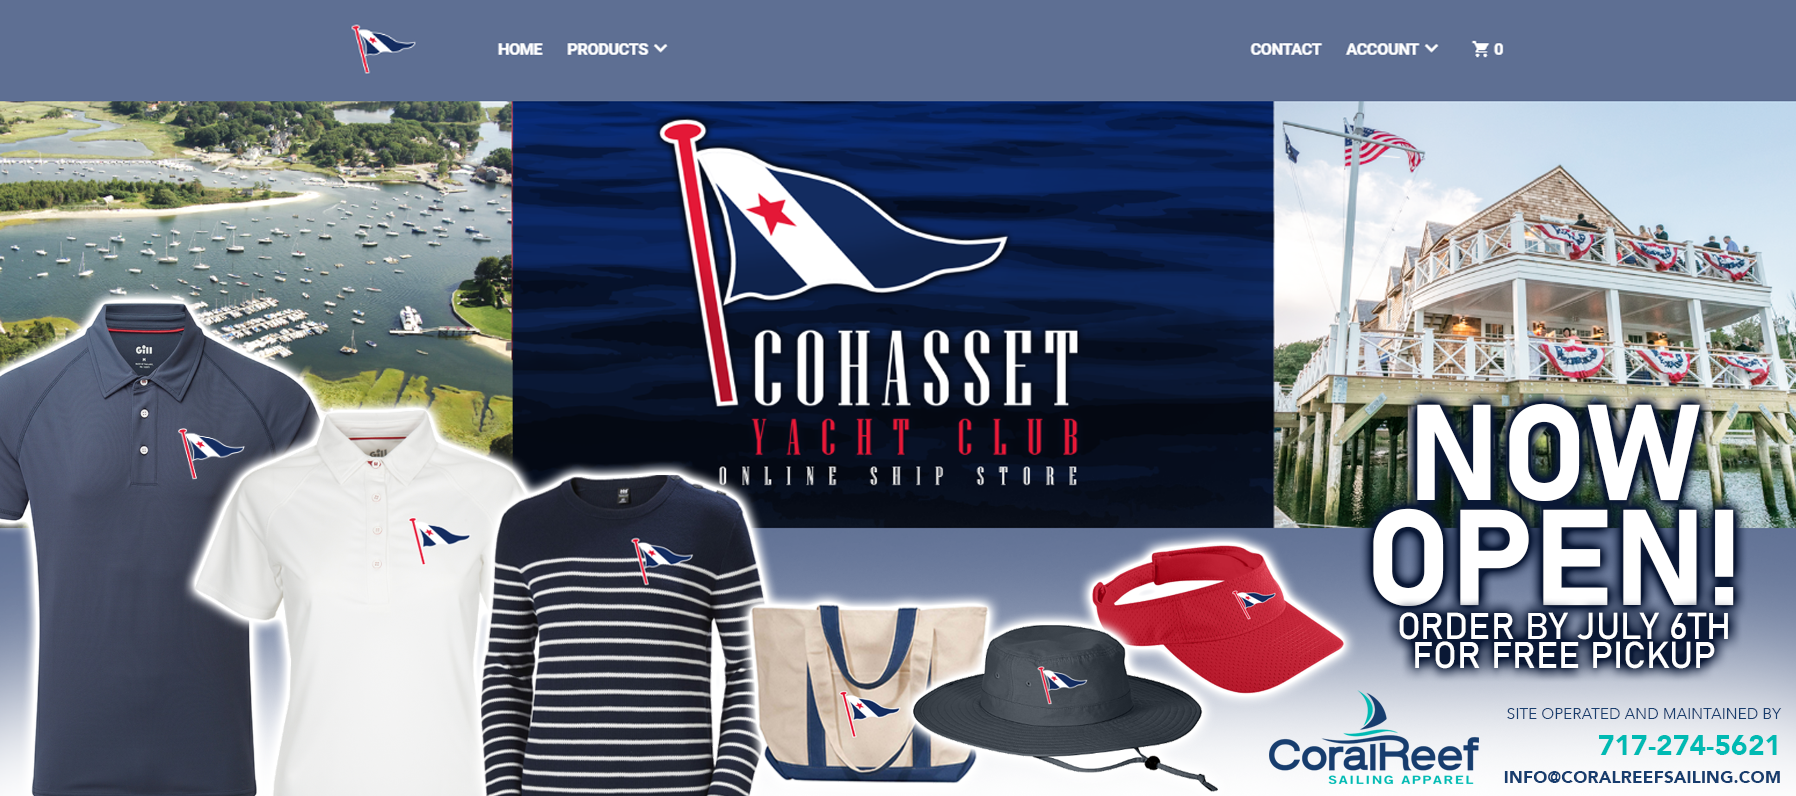 Cohasset Yacht Club Coral Reef Sailing Apparel